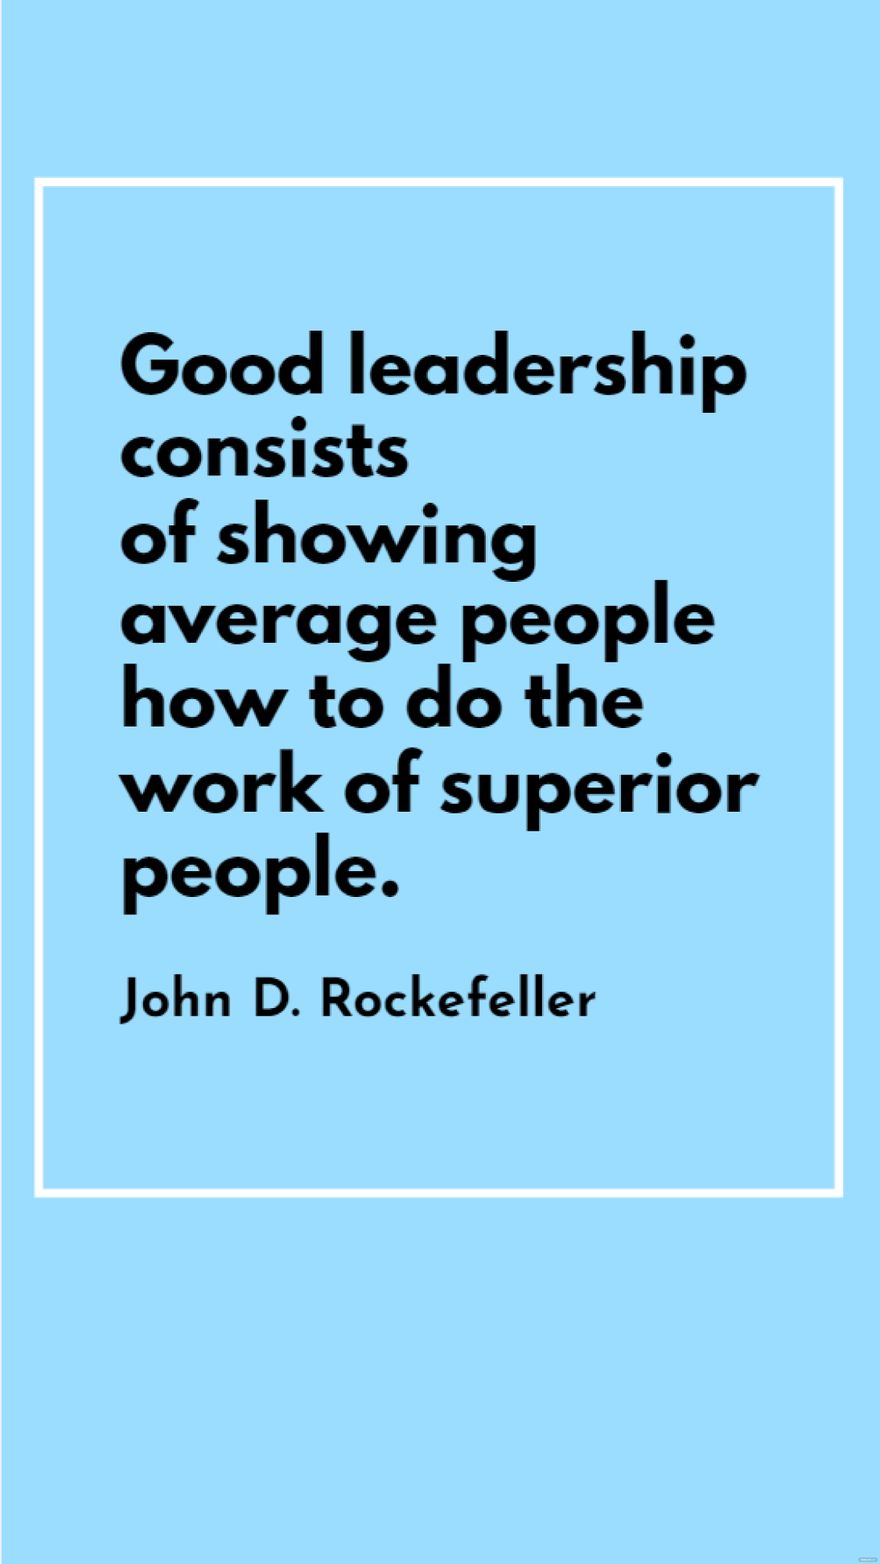 John D. Rockefeller - Good leadership consists of showing average people how to do the work of superior people.